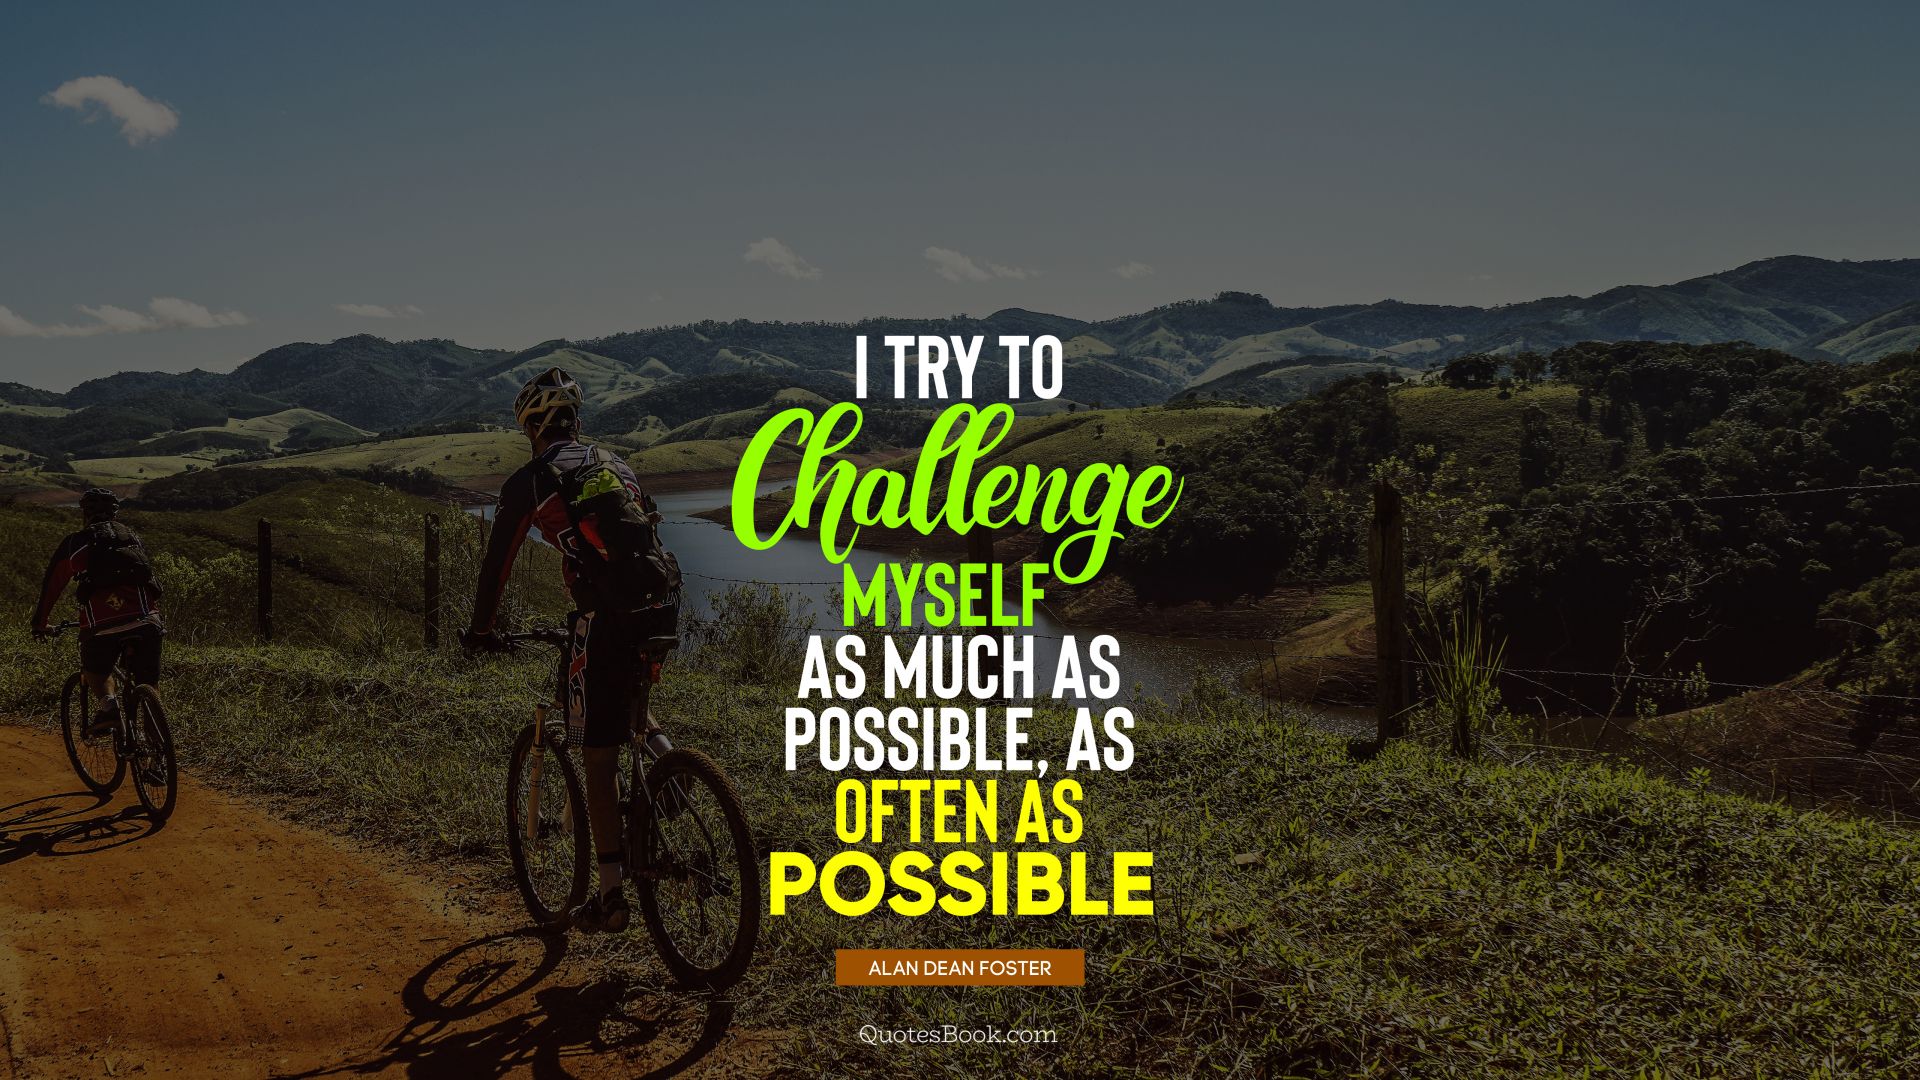 I try to challenge myself as much as possible, as often as possible. - Quote by Alan Dean Foster